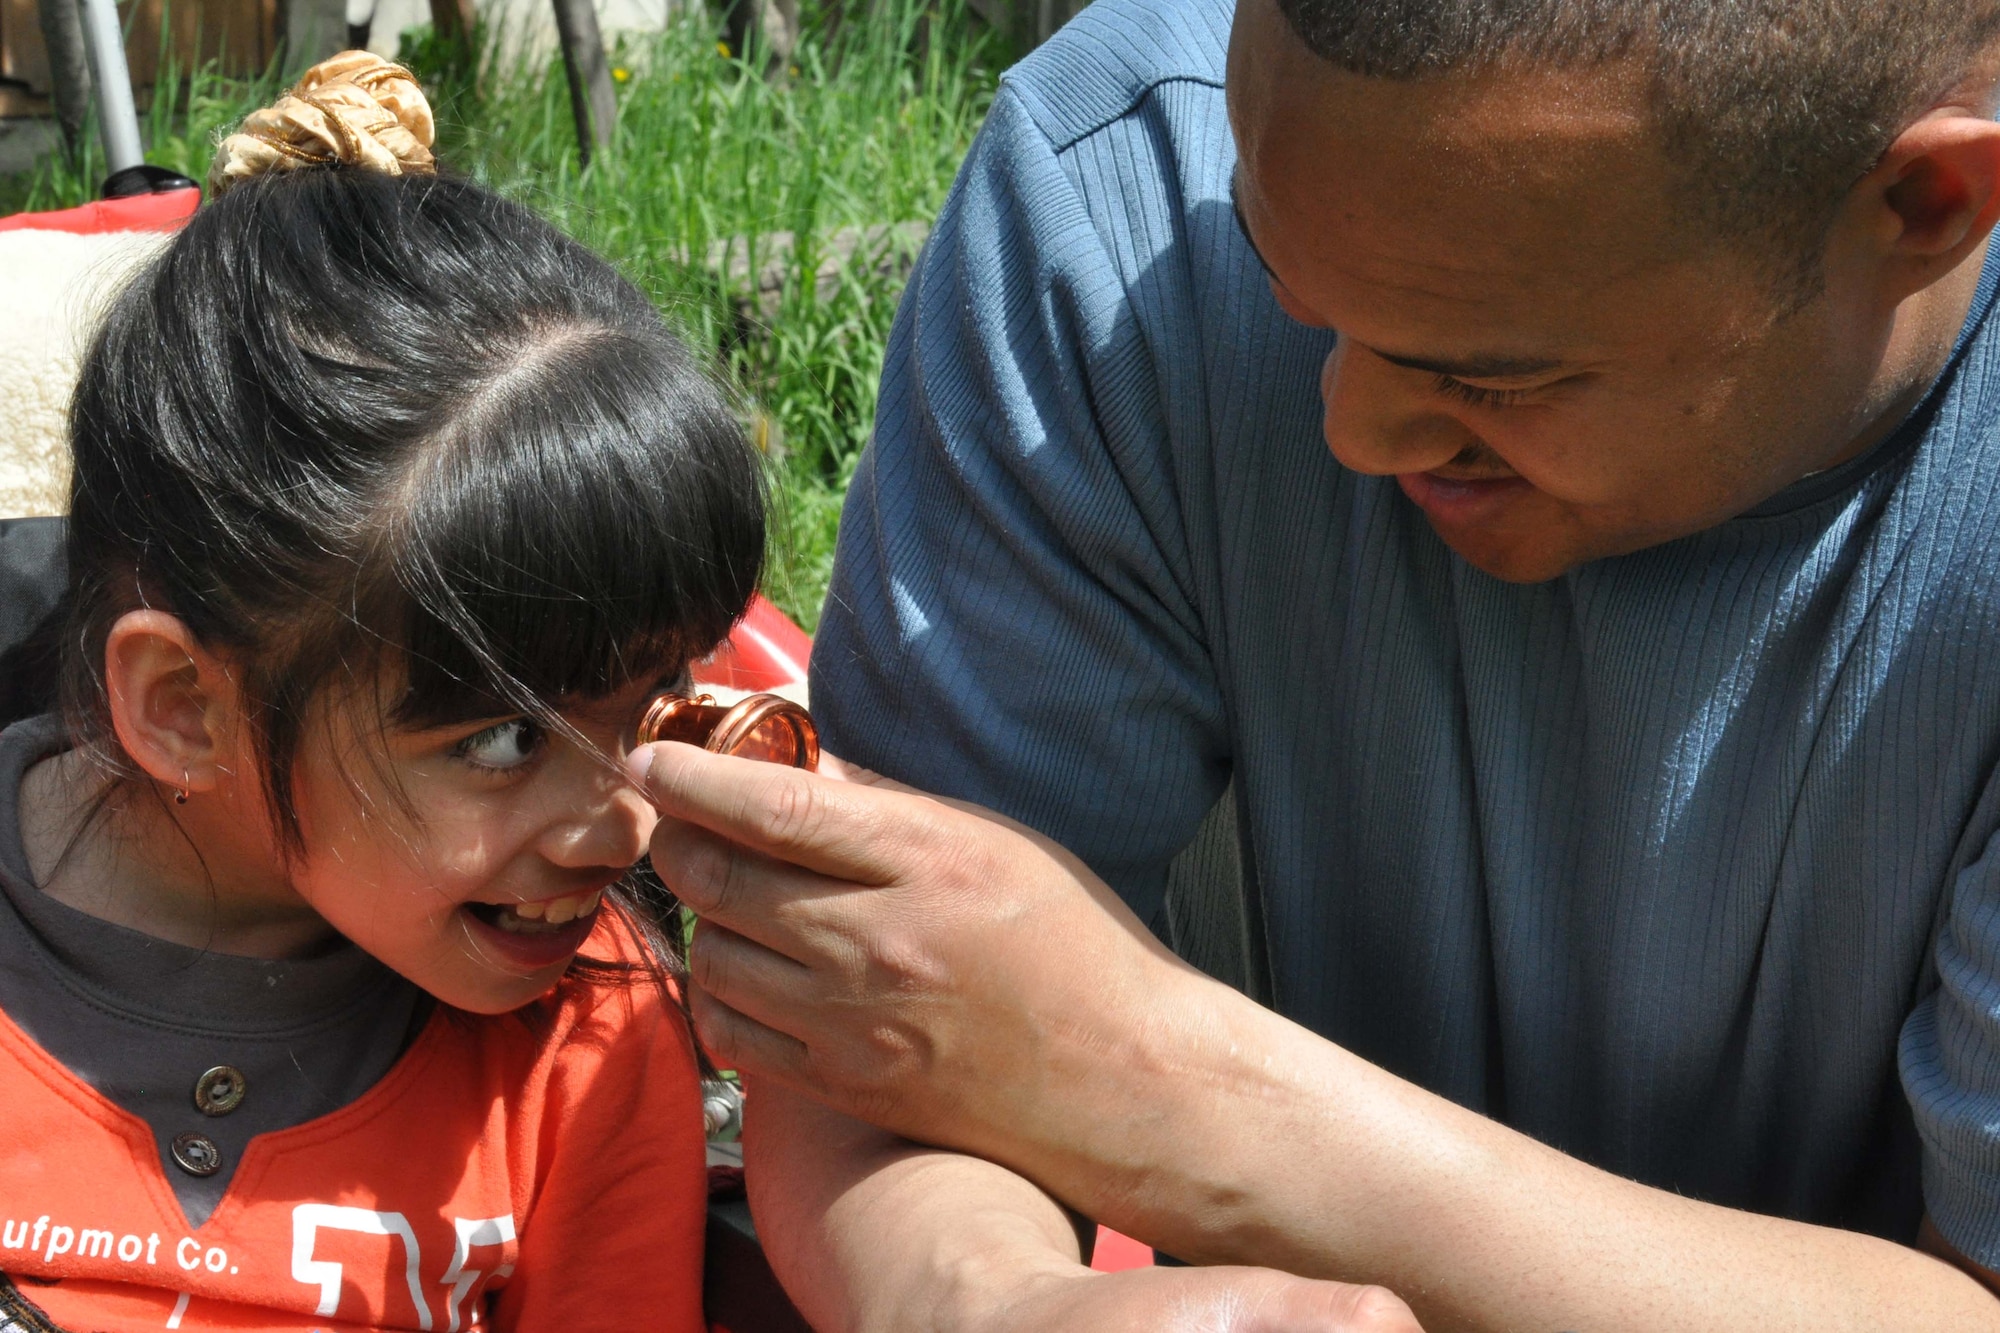 Master Sgt. Anthony Blalock, an Airman from the Transit Center at Manas, Kyrgyzstan, helps a girl look through a kaleidoscope at the Nadjeshda Children's Center April 27, 2010. Nadjeshda is home for 60 children and teenagers who are disabled in different ways. With the help of adults, children there are able to learn to sign, draw, study, work and have fun using various methods of therapy. U.S. Airmen have supported Nadjeshda for the last six years, helping rebuild and repair the facility and spending time with the children. (U.S. Air Force photo/Staff Sgt. Carolyn Viss)